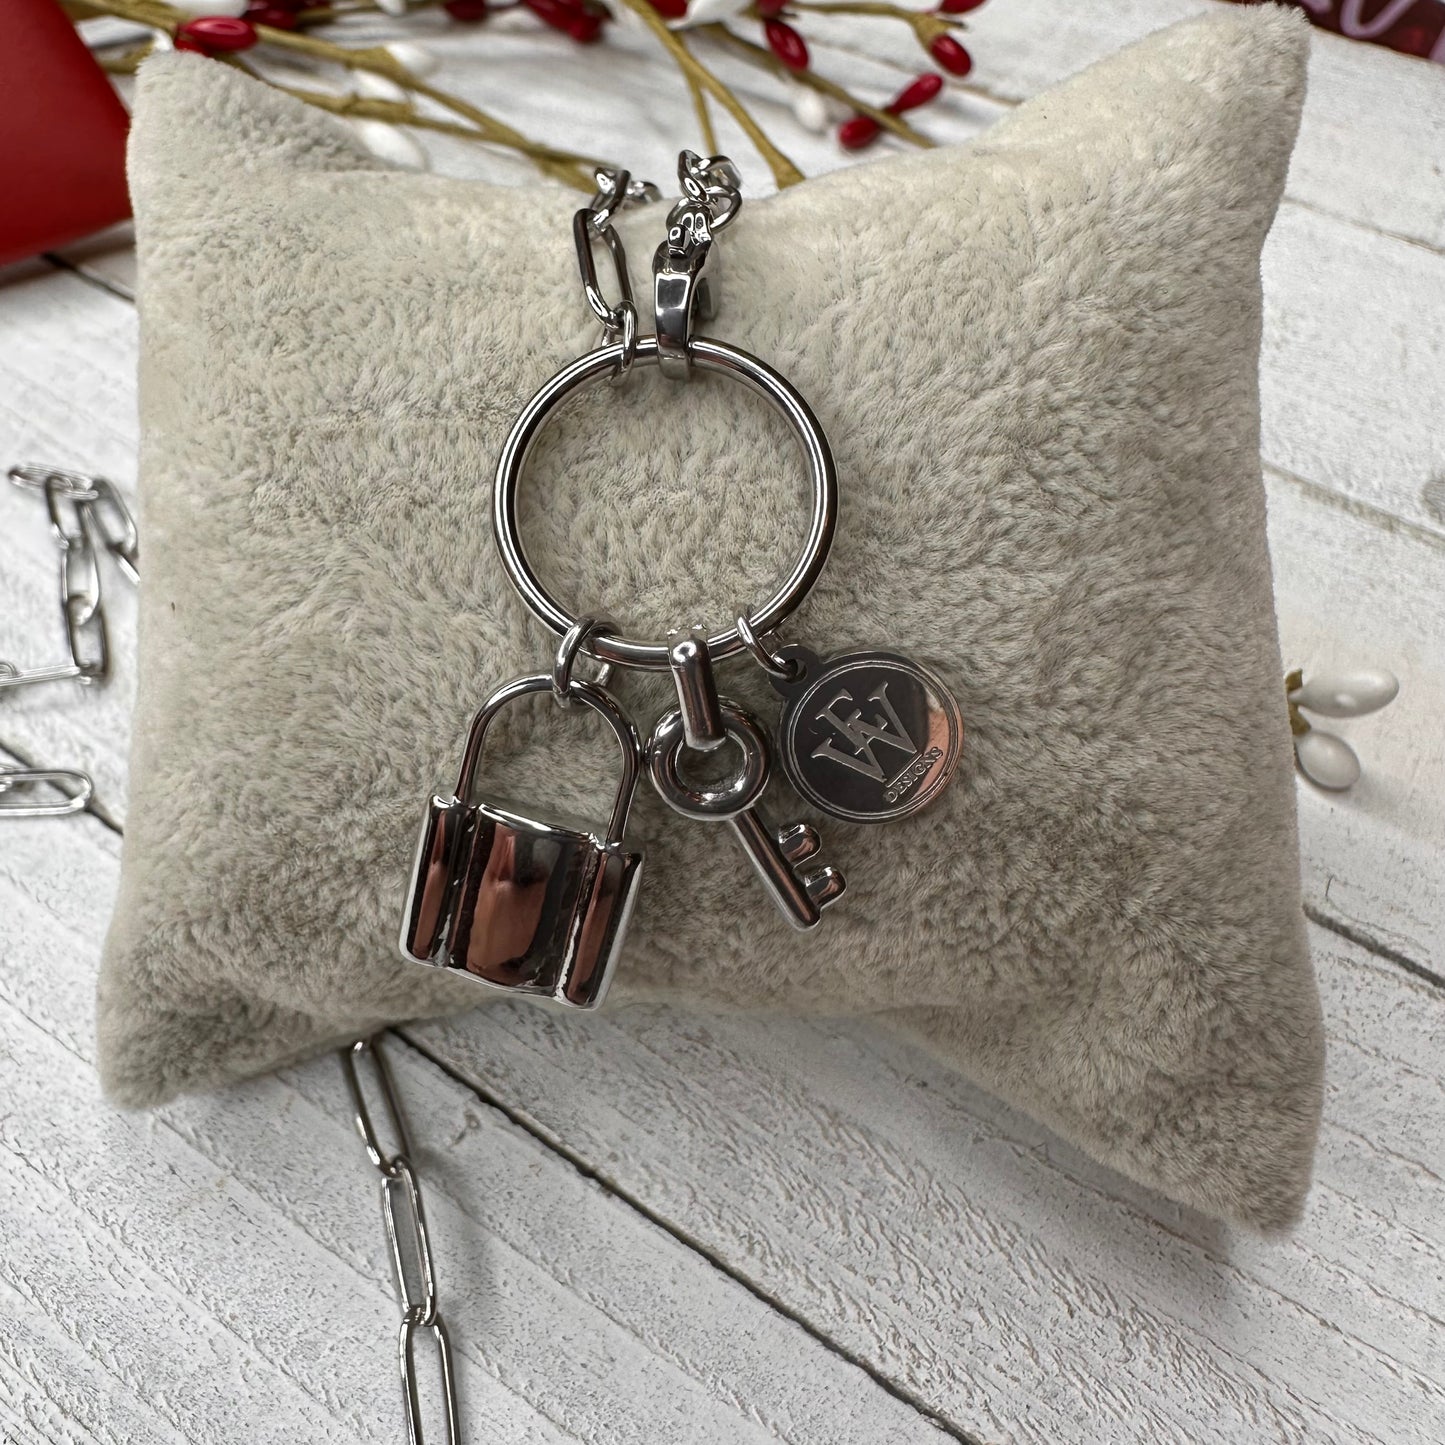 Erika Williner Designs - The key to my heart necklace